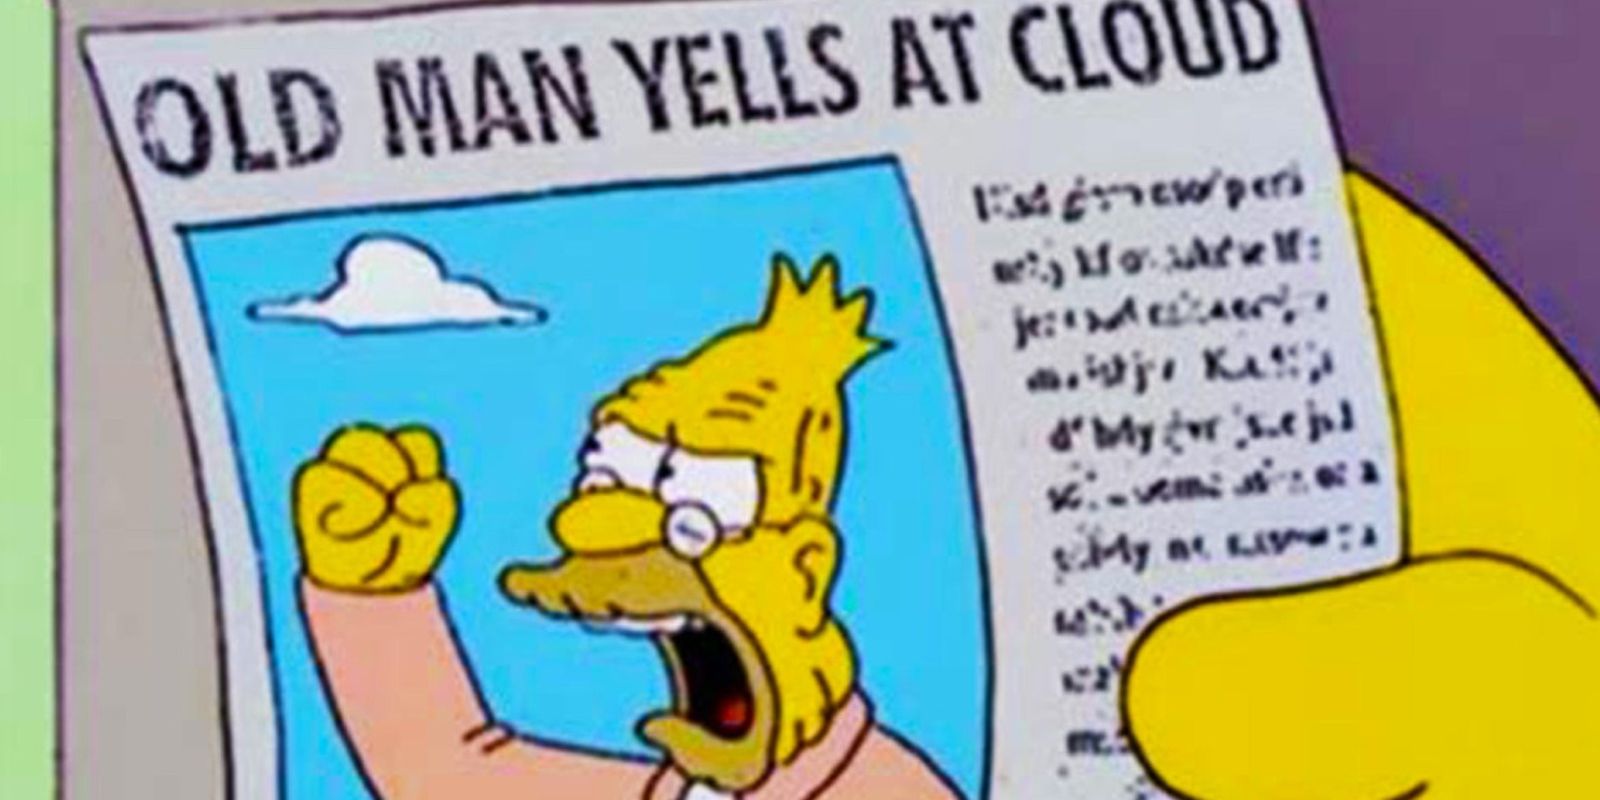 Grampa Abe Simpson holds newspaper clipping of him yelling at a cloud.